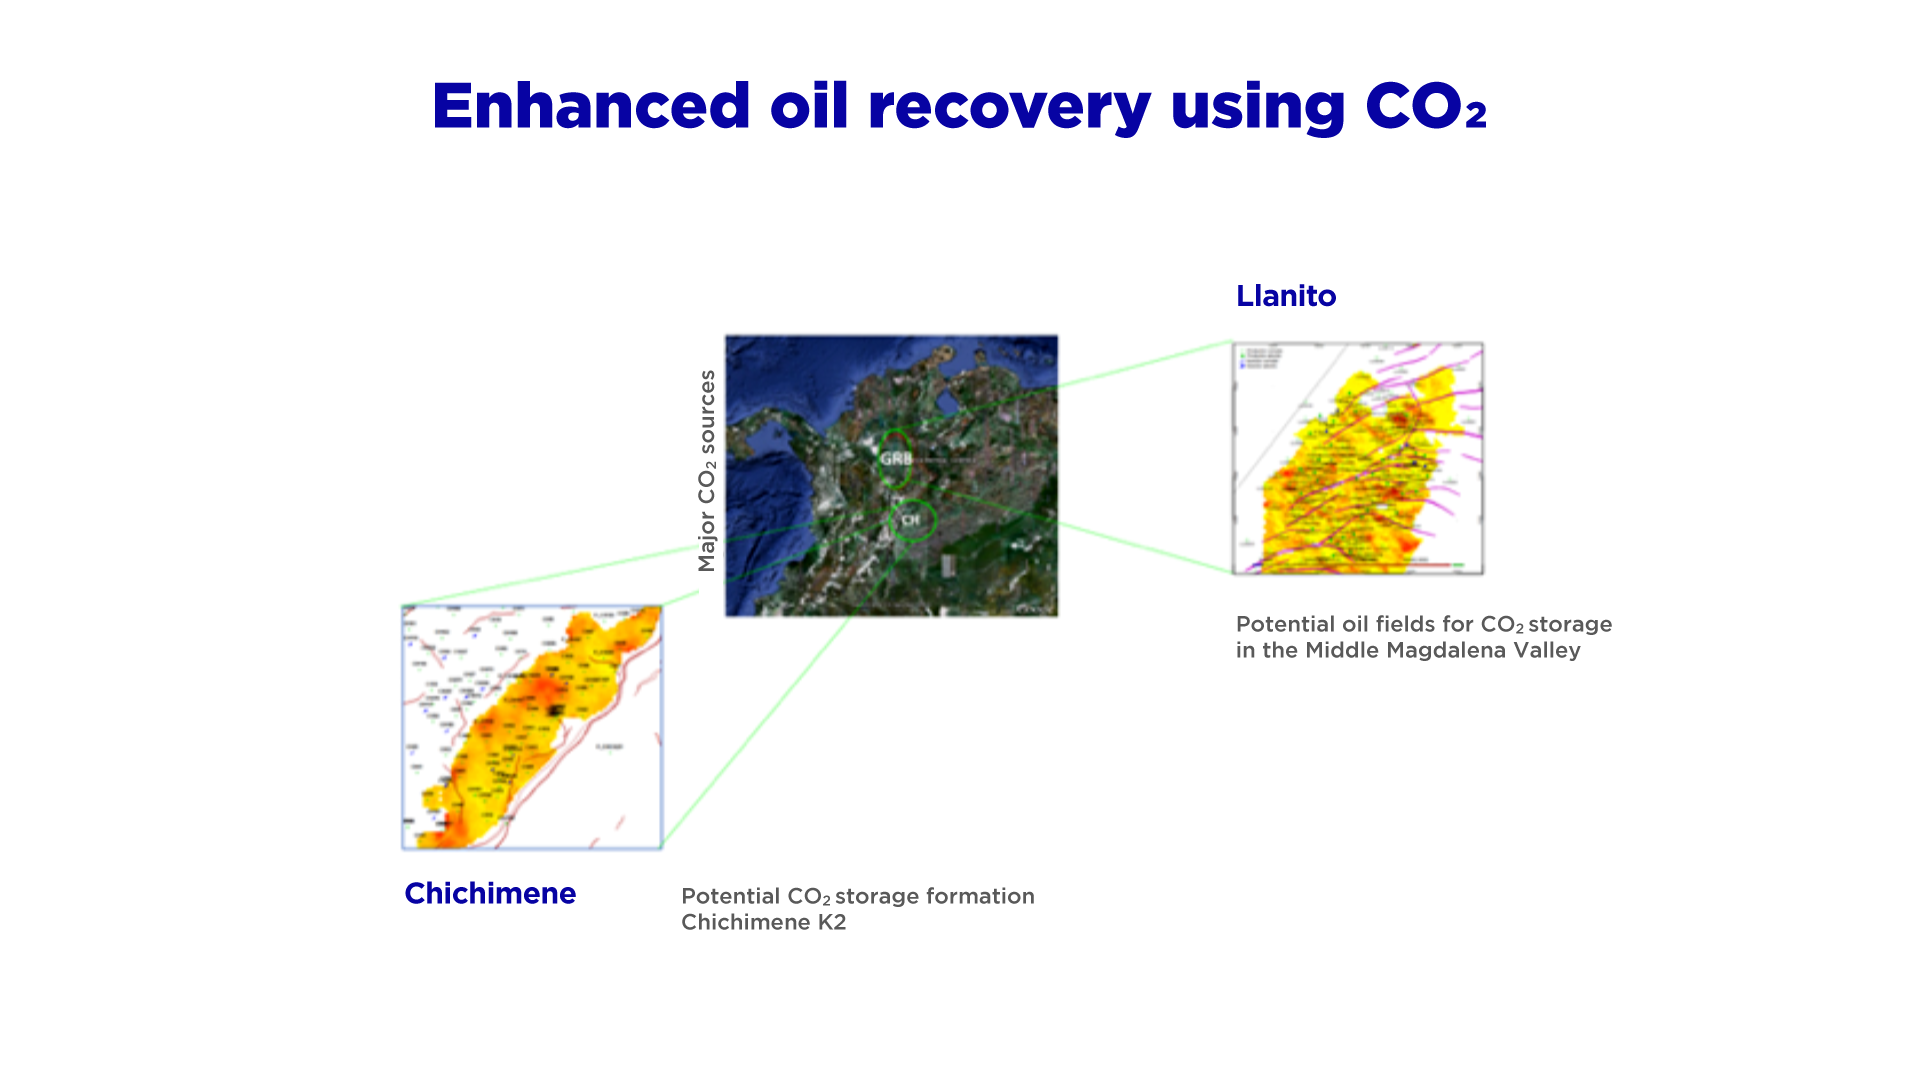 Enhanced oil recovery using CO2